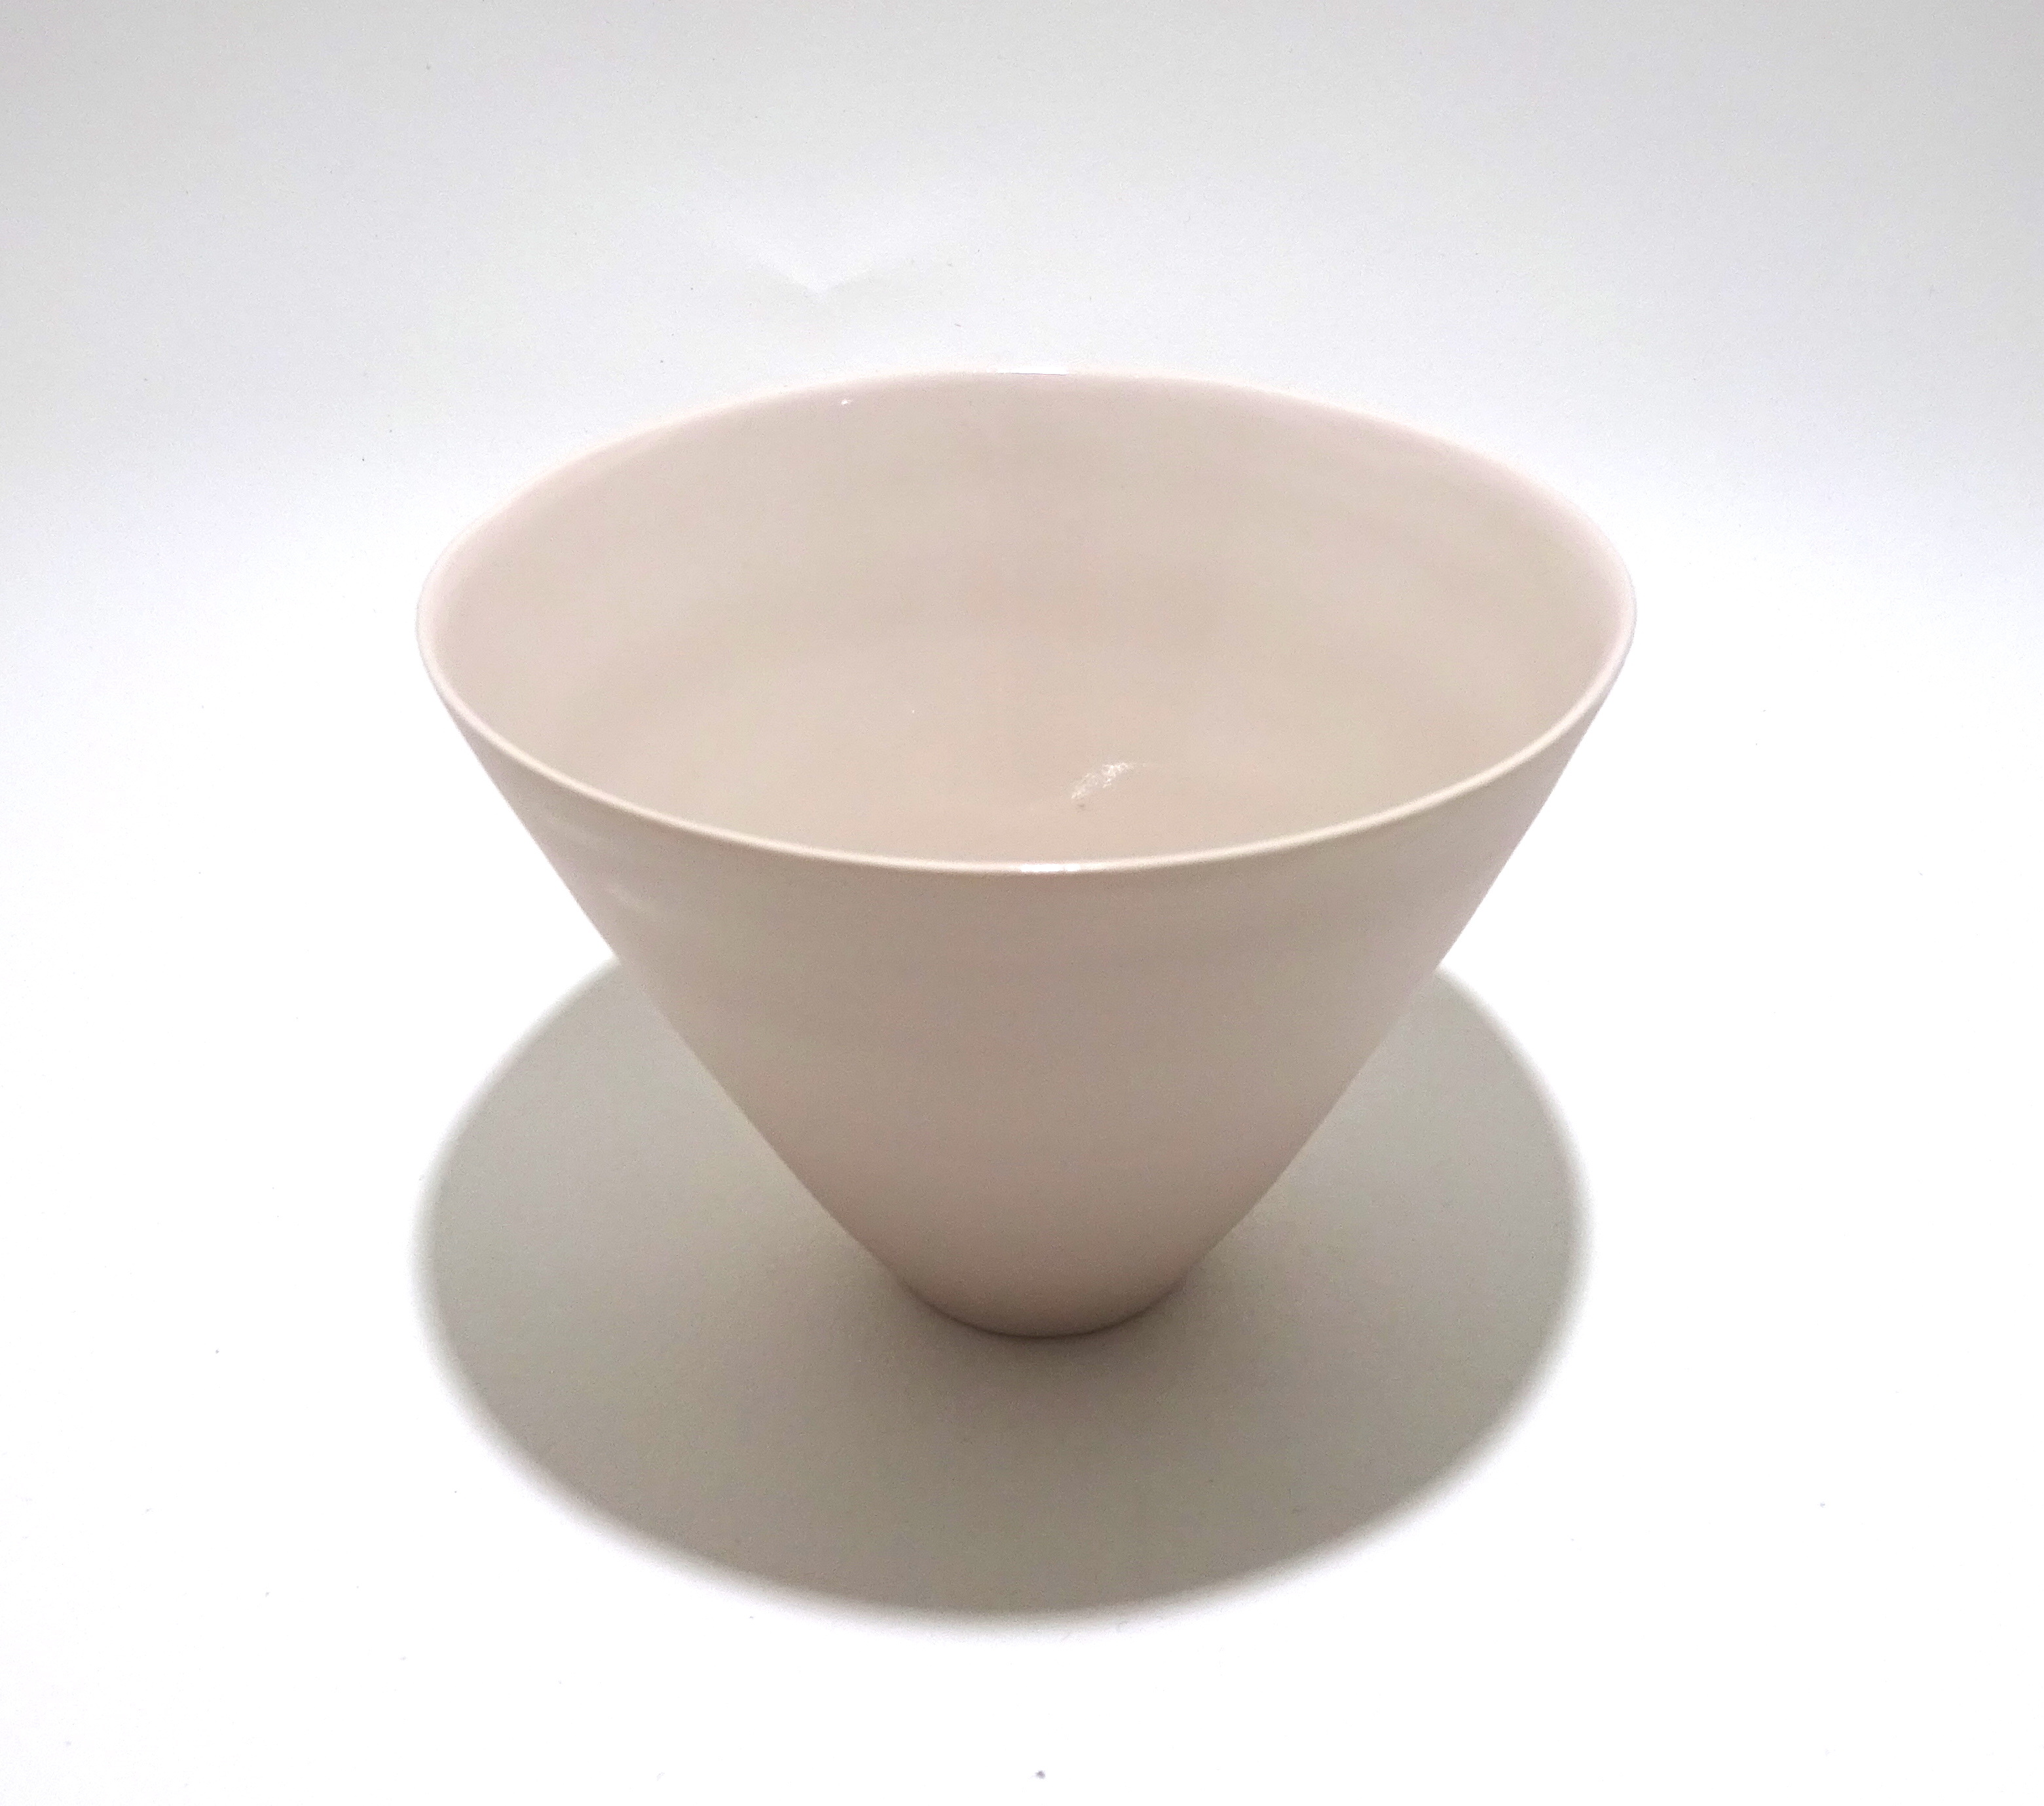 Large White Porcelain Conical Bowl by Becky Mackenzie (Porcelain)